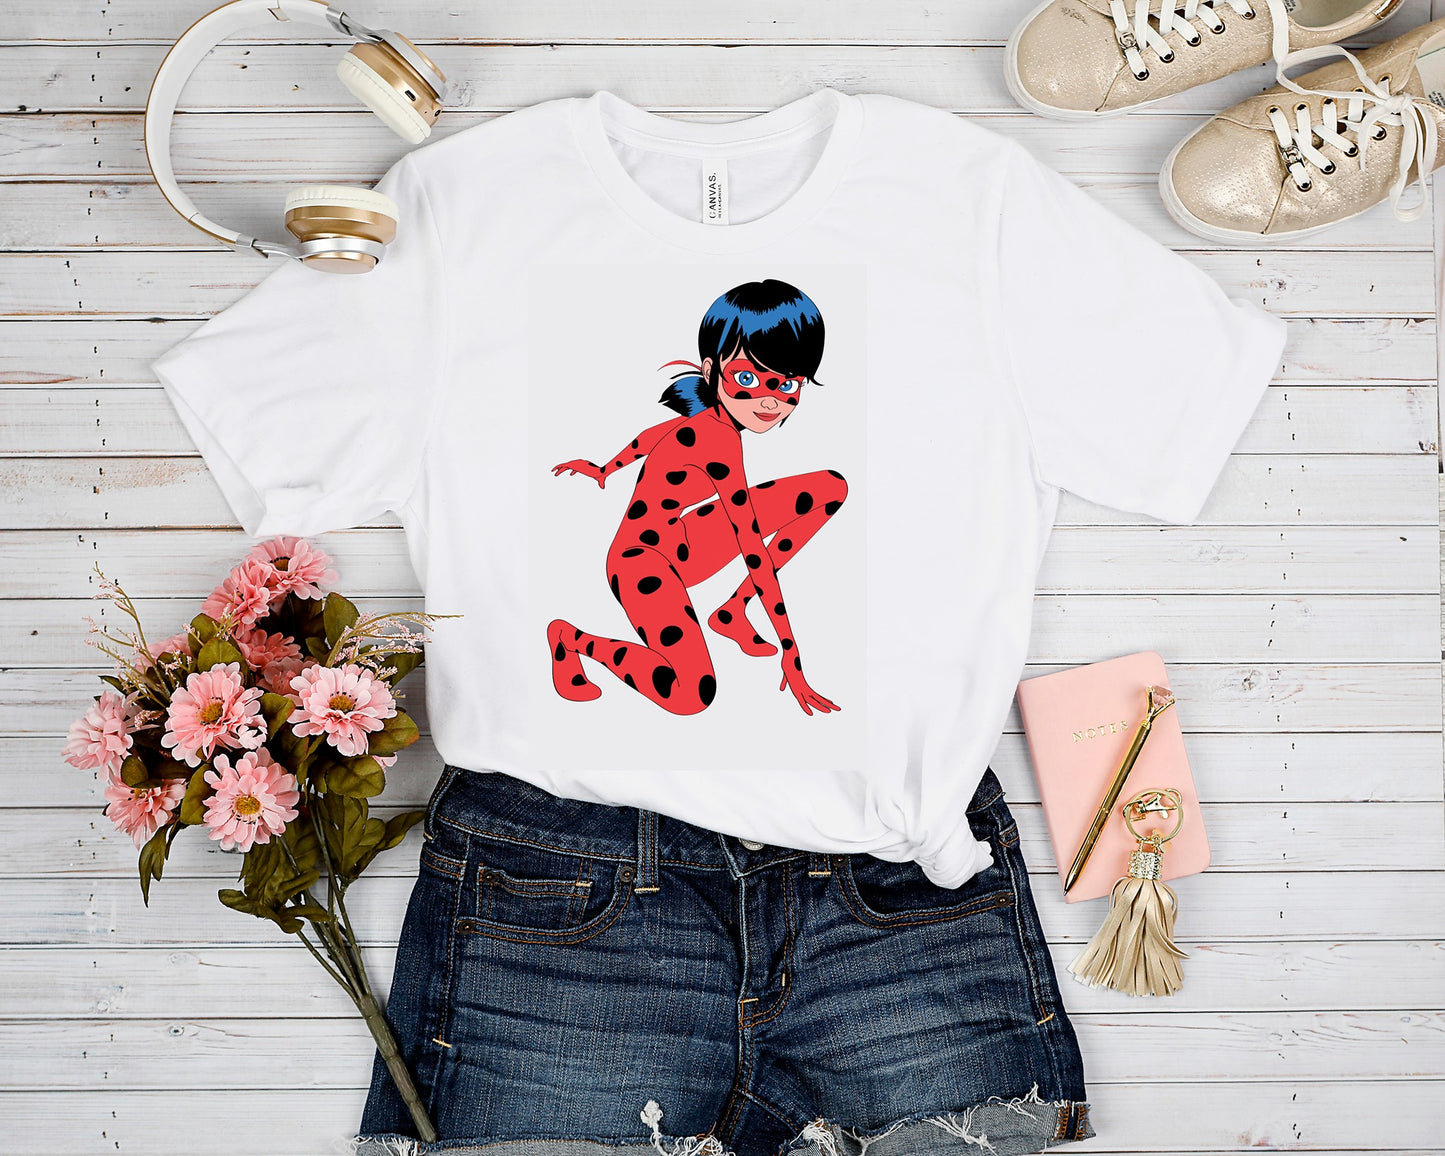 OUTFIT 6-LADY BUG HERO TEE